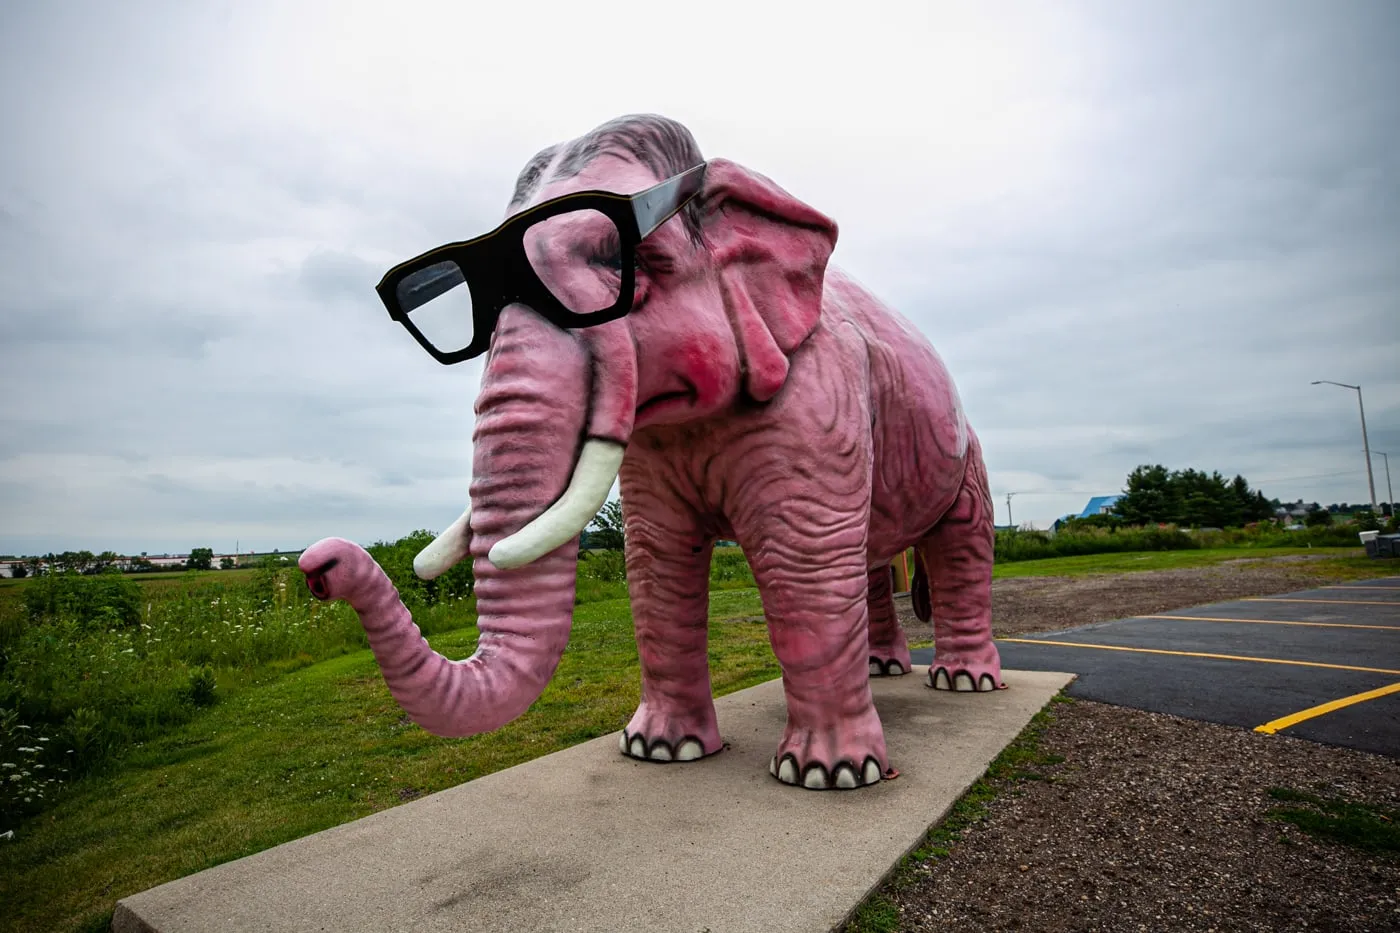 Pinkie the Pink Elephant in DeForest, Wisconsin. Giant Pink Elephant with Glasses roadside attraction in Wisconsin.